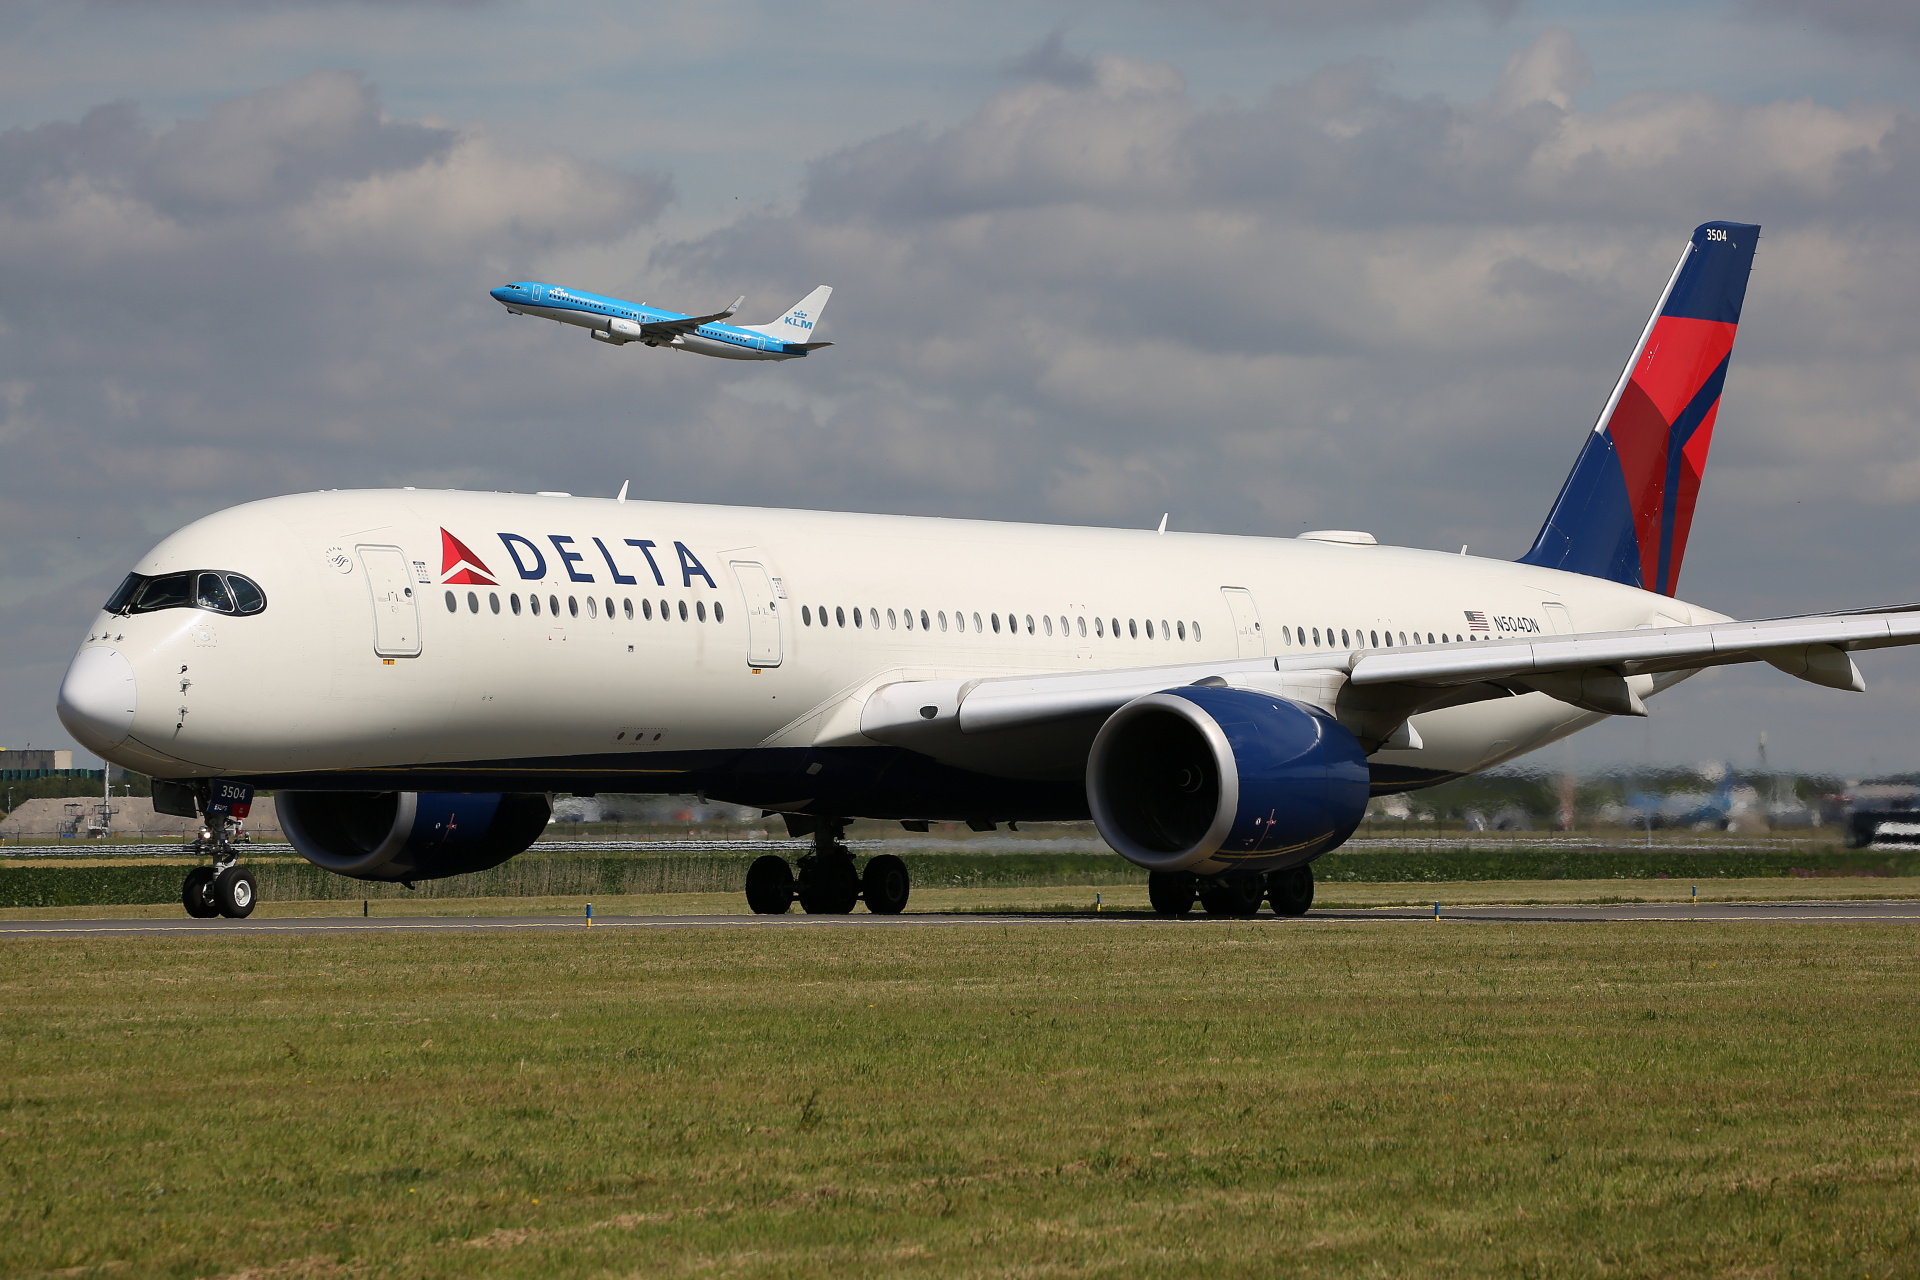 N504DN (Aircraft » Schiphol Spotting » Airbus A350-900 » Delta Airlines)